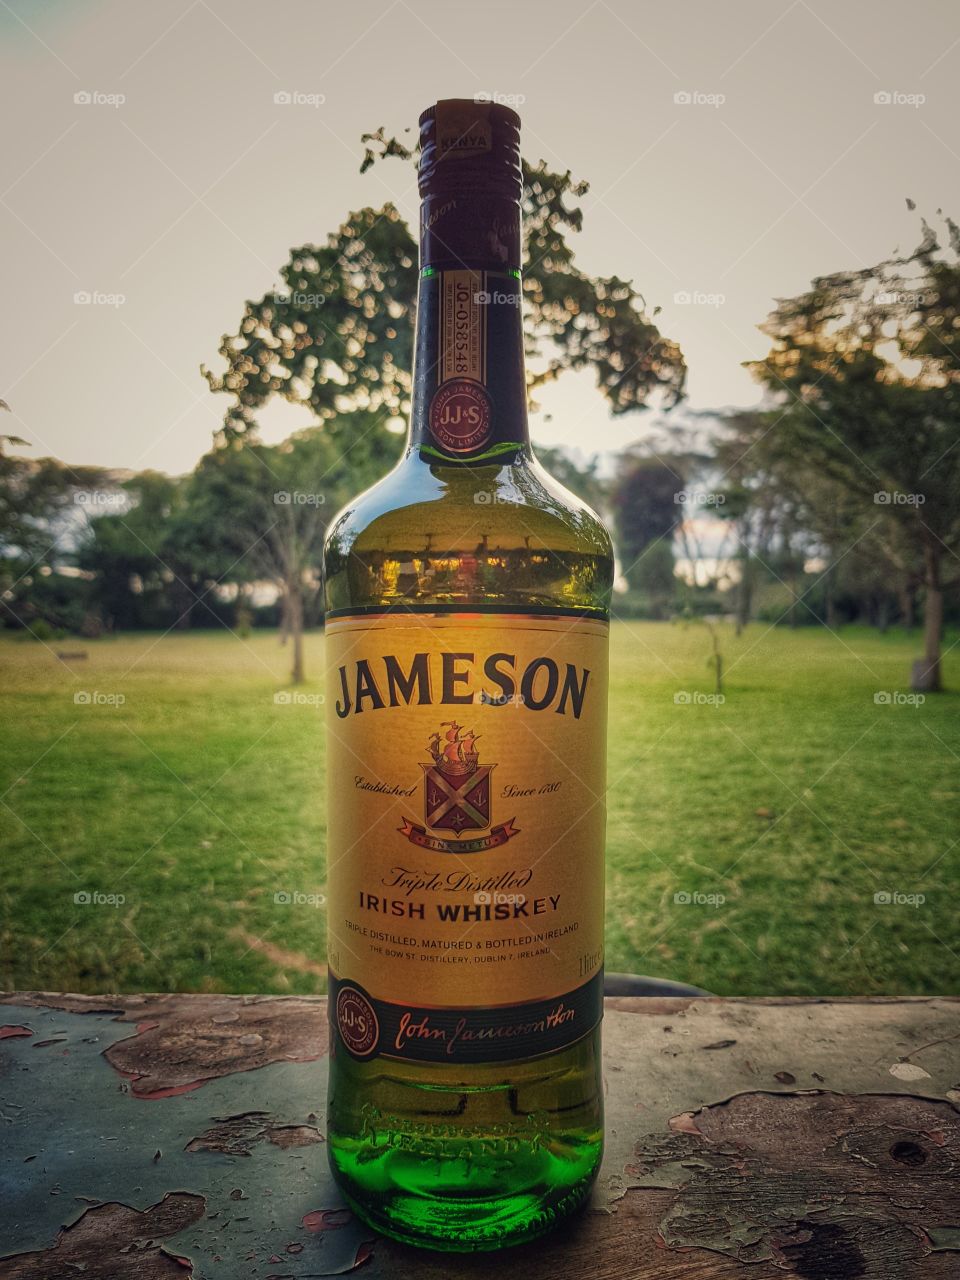 Nature and whiskey get along like no other!